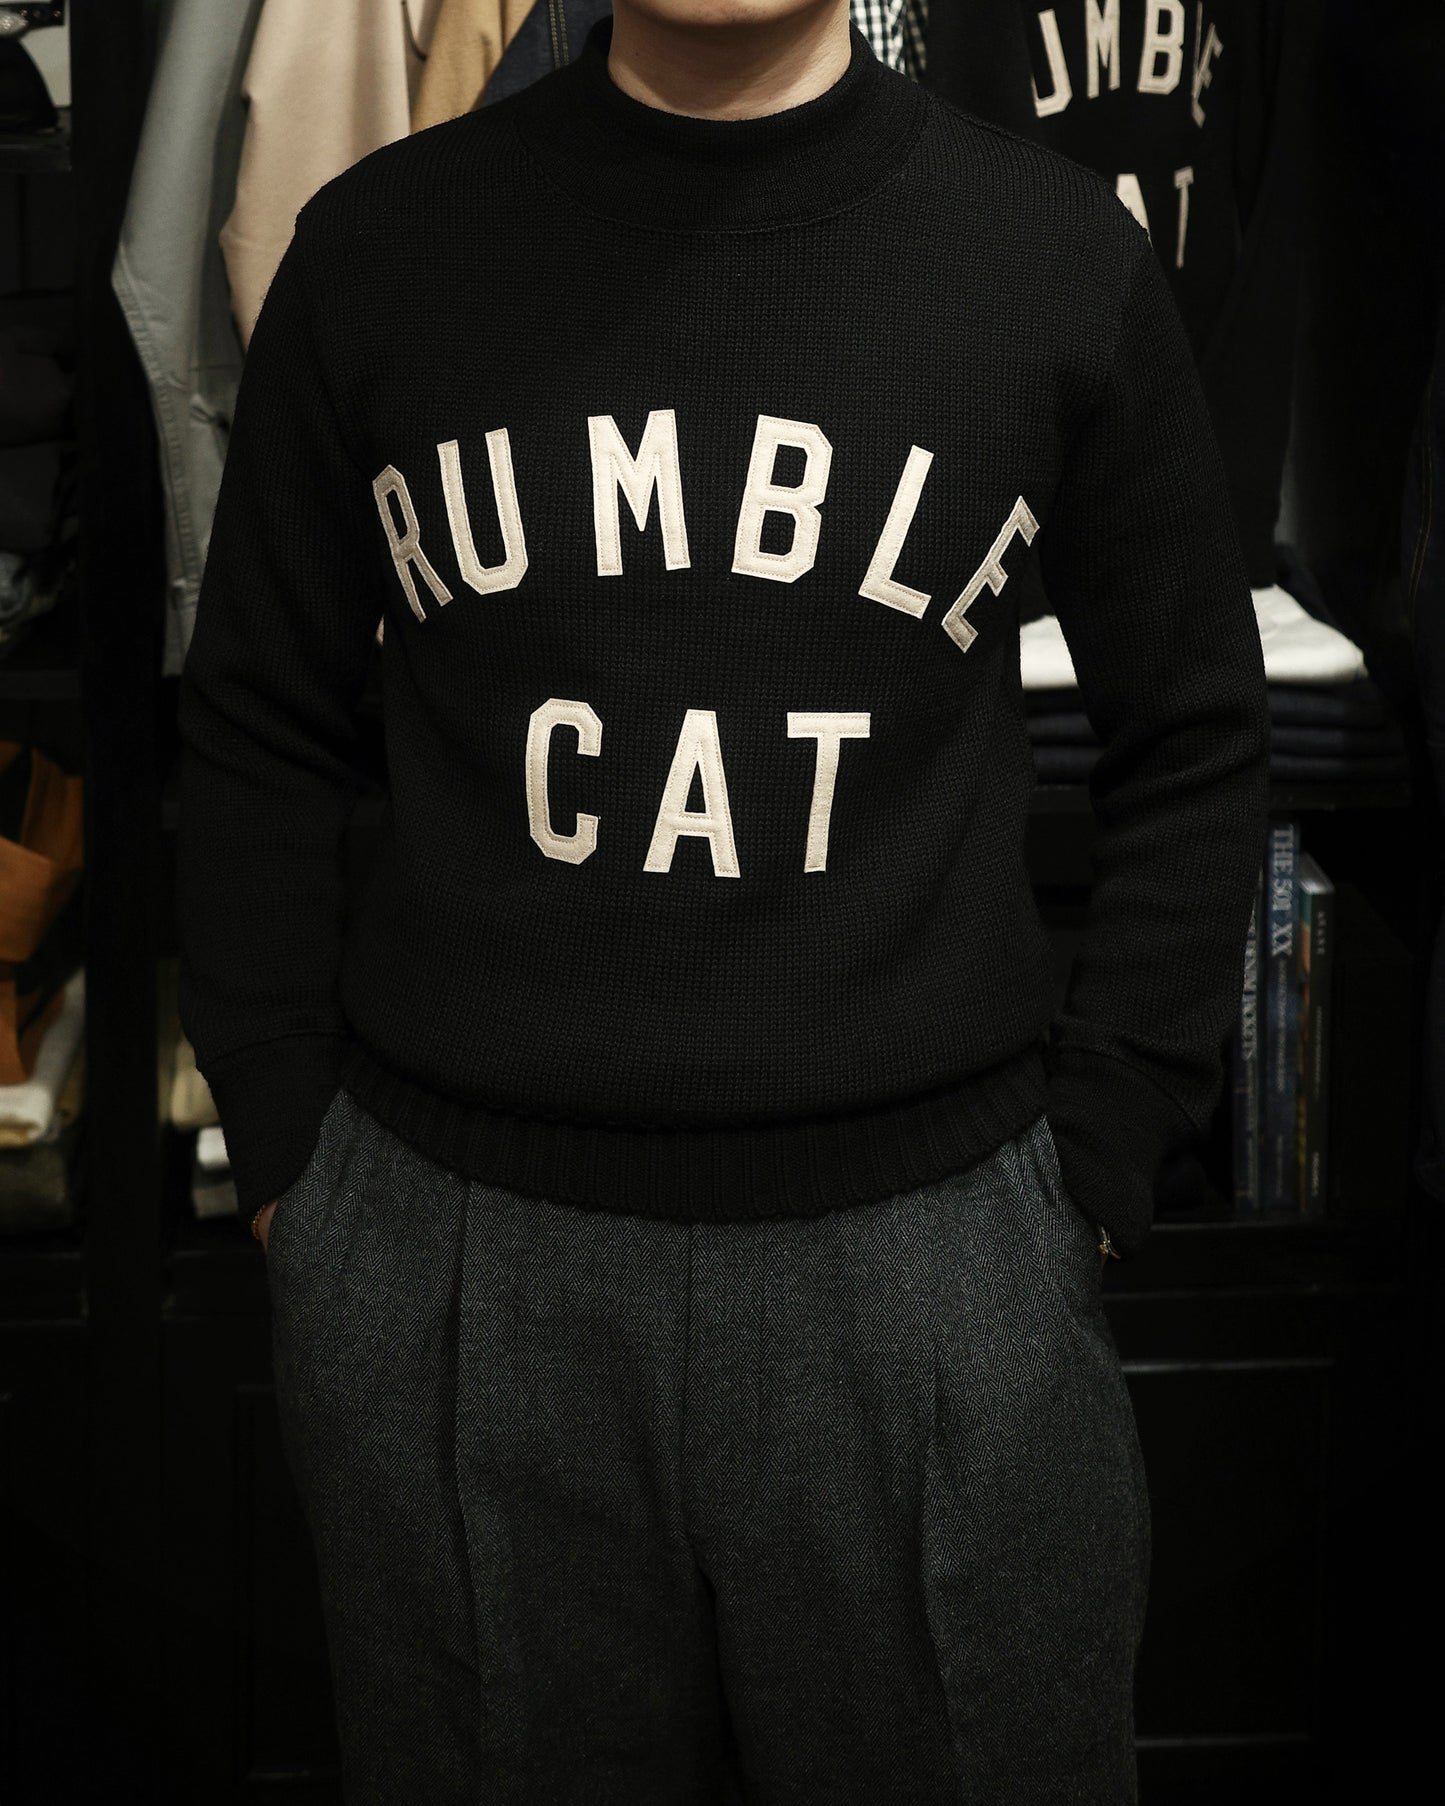 The Groovin High - A411 Crewneck Knit (Rumble Cat)